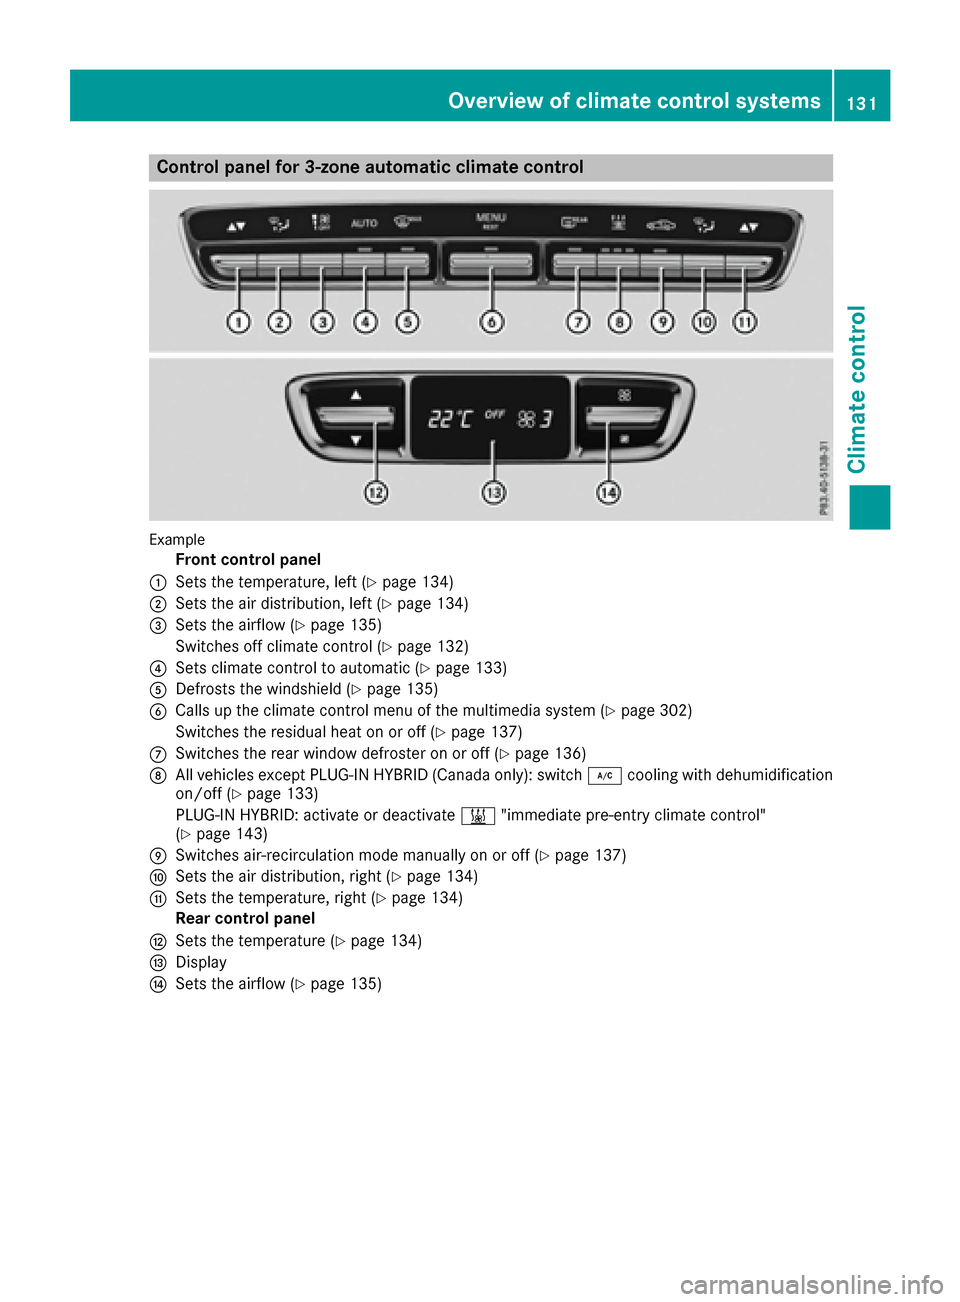 MERCEDES-BENZ C-Class SEDAN 2016 W205 Owners Manual Control panel for 3-zone automatic climate control
Example
Front control panel
:Sets the temperature, left (Ypage 134)
;Sets the air distribution, left (Ypage 134)
=Sets the airflow (Ypage 135)
Switch